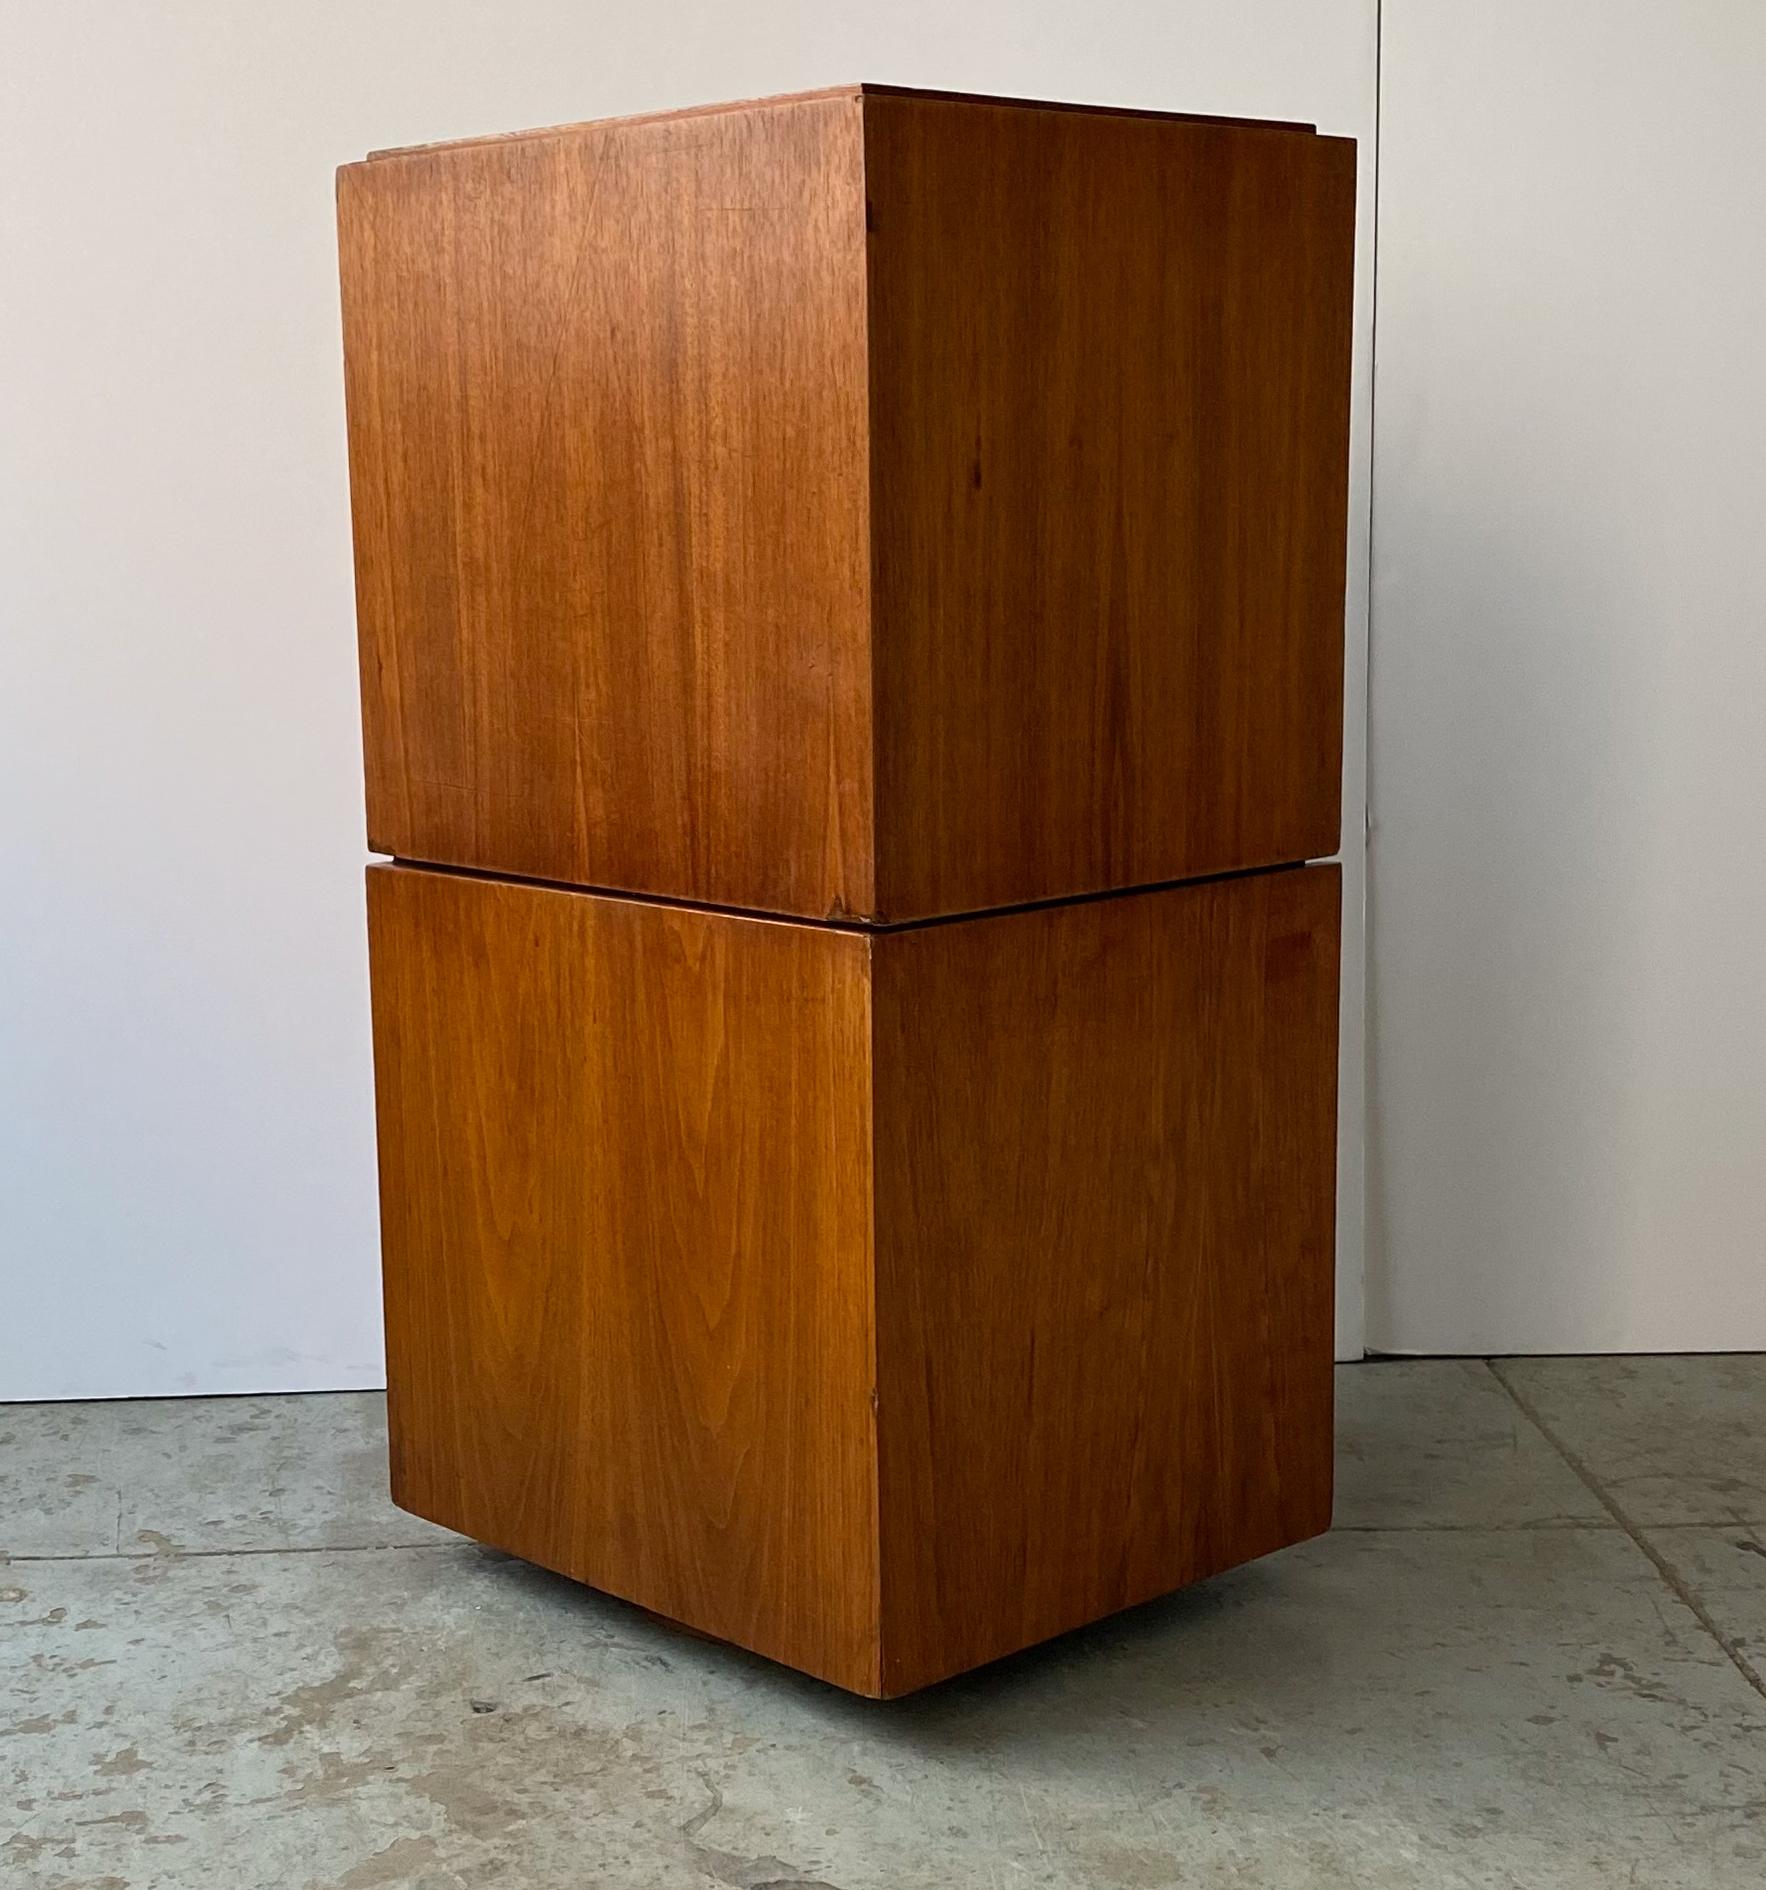 Two-piece stacking and rotating storage cabinet in walnut, each with two open cubbies, designed originally for record storage by Paul Mayen and produced by Habitat/Intrex, circa 1960. The bottom component has a ball-bearing turntable underneath so